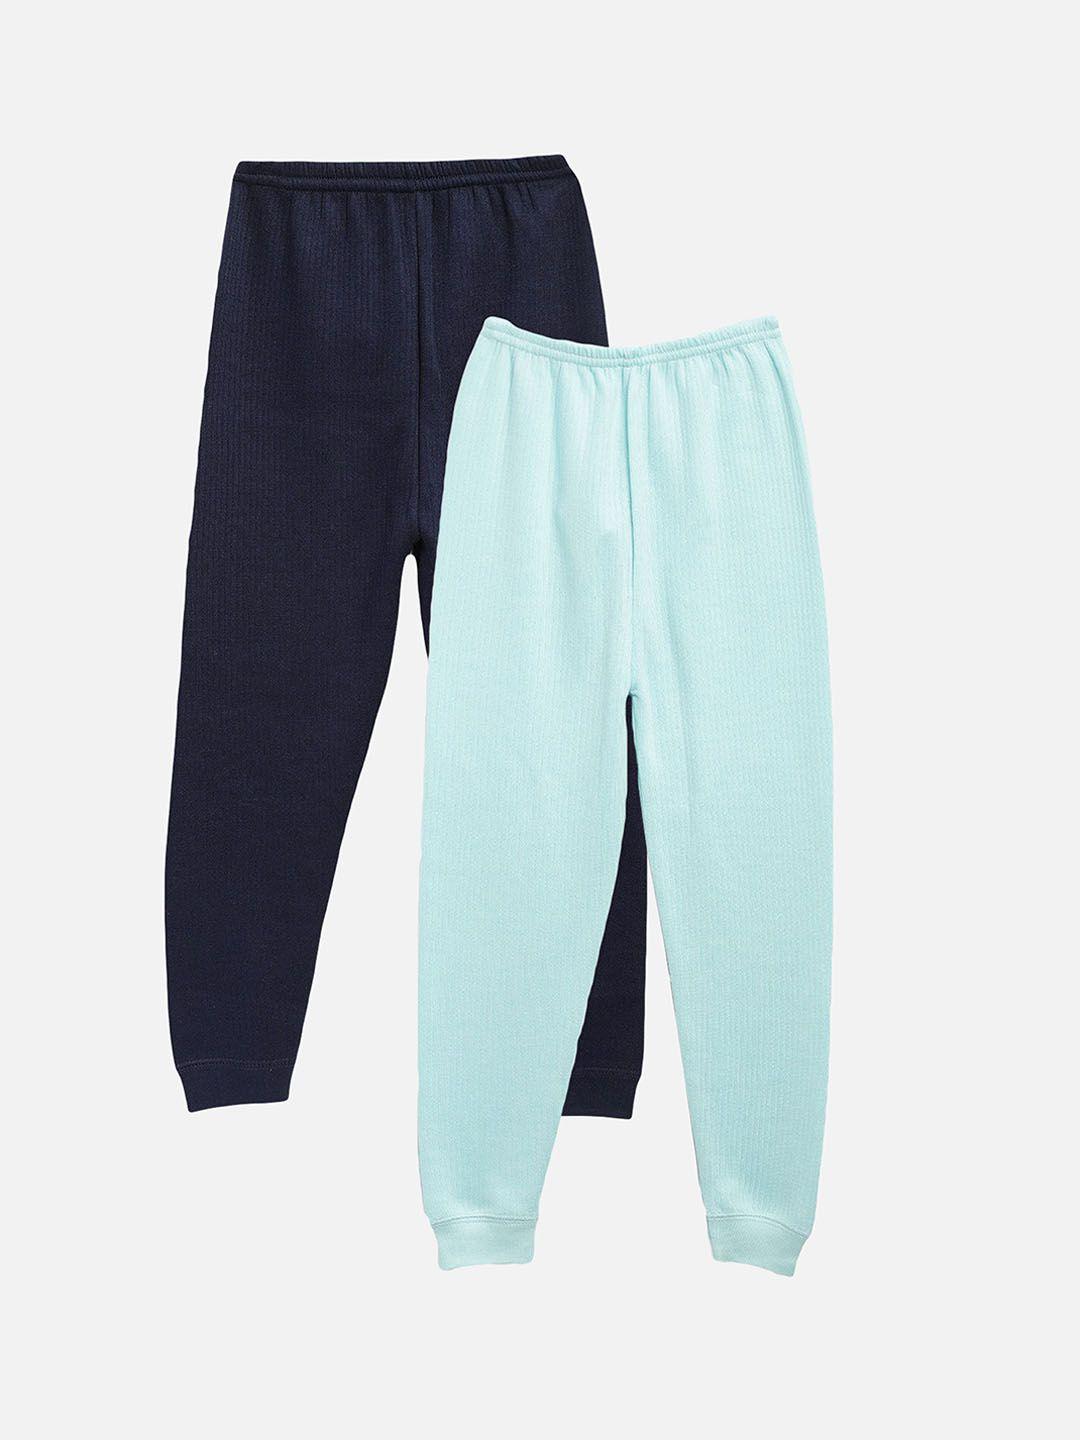 kanvin boys pack of 2 turquoise blue & navy blue solid thermal bottoms